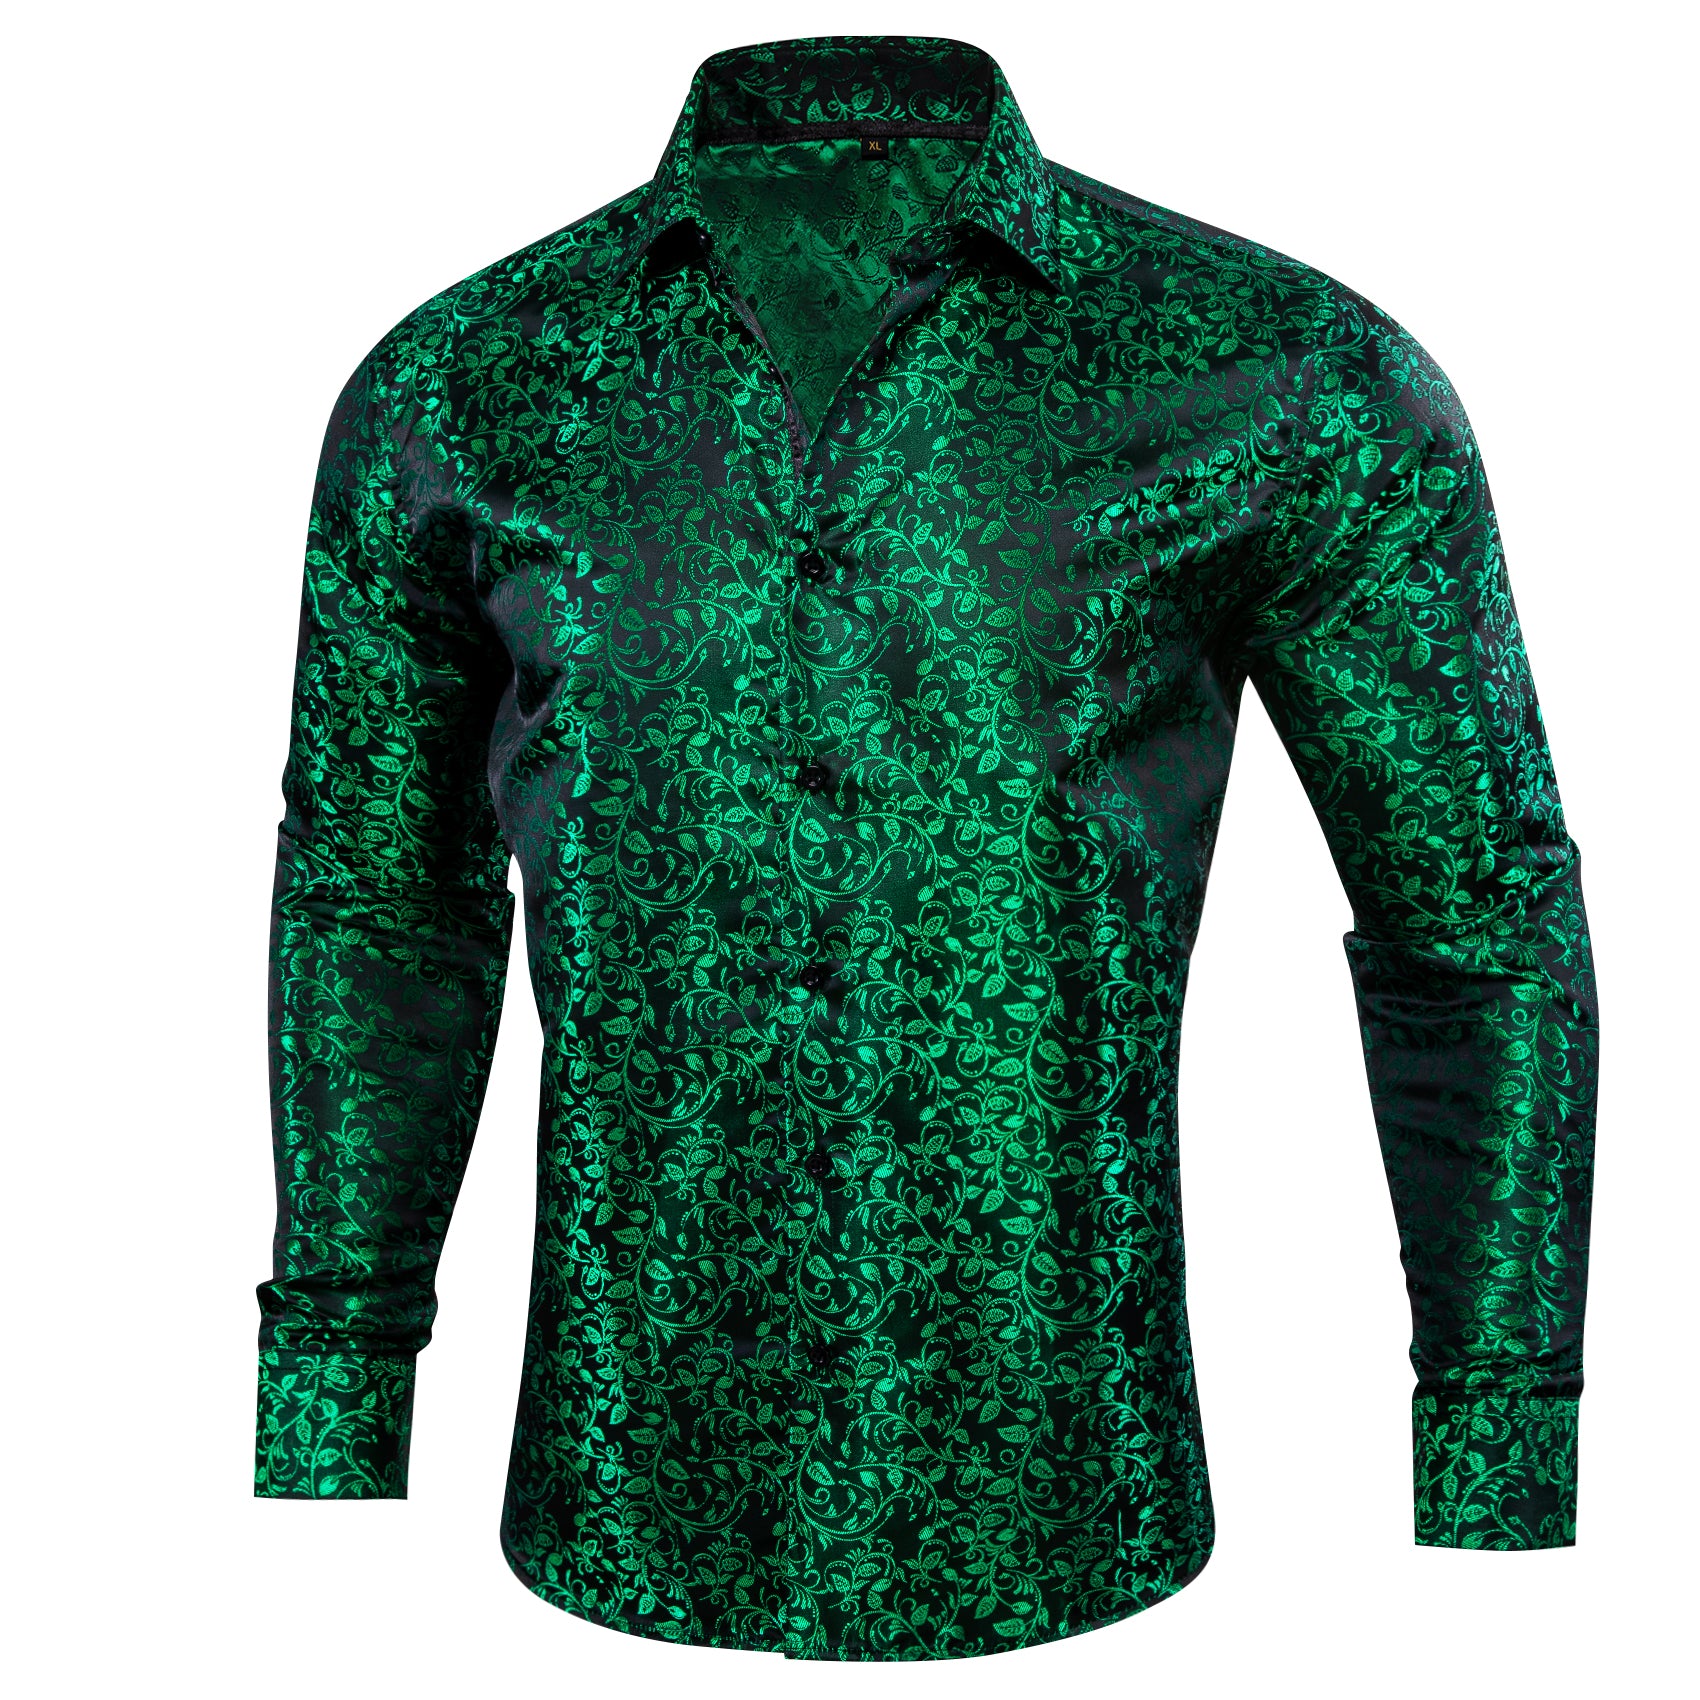 Barry.wang Luxury Green Leaves Floral Silk Shirt